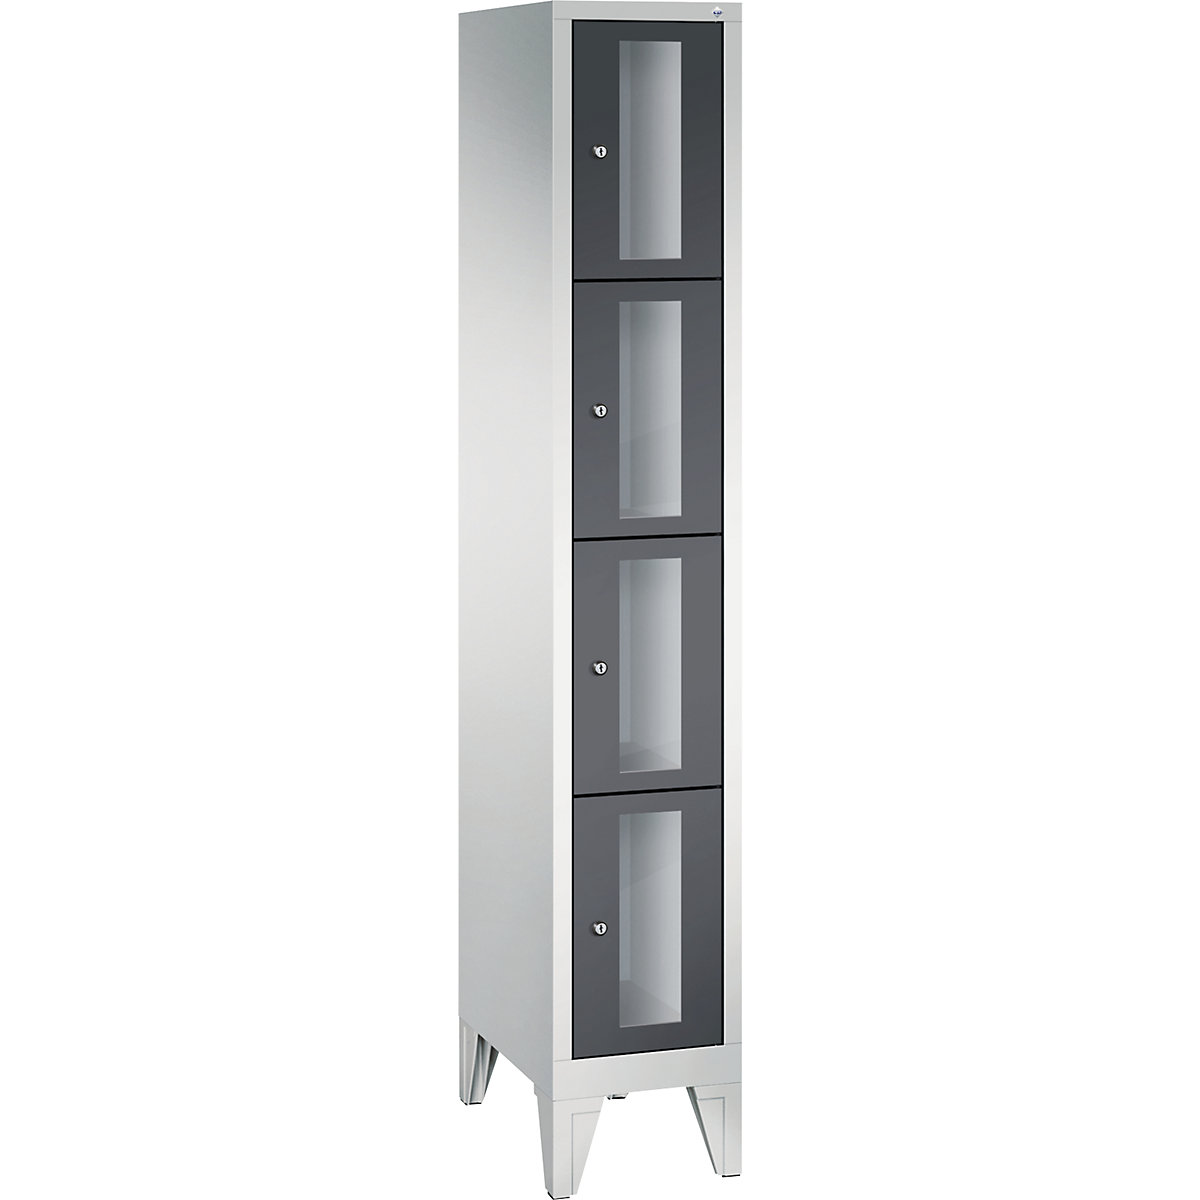 CLASSIC locker unit, compartment height 375 mm, with feet – C+P, 4 compartments, width 320 mm, black grey door